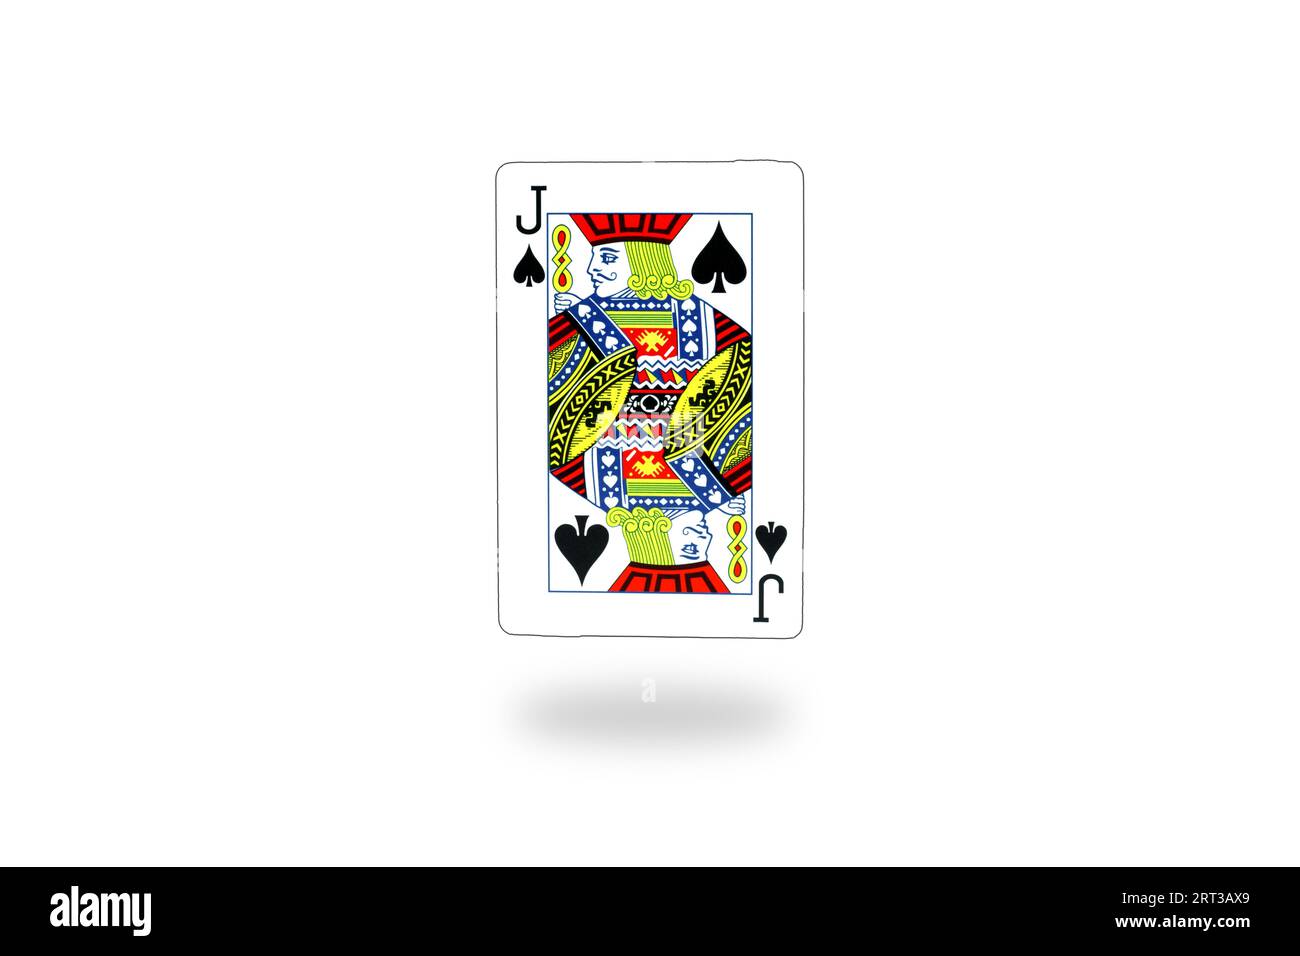 A Jack playing card in the white background Stock Photo